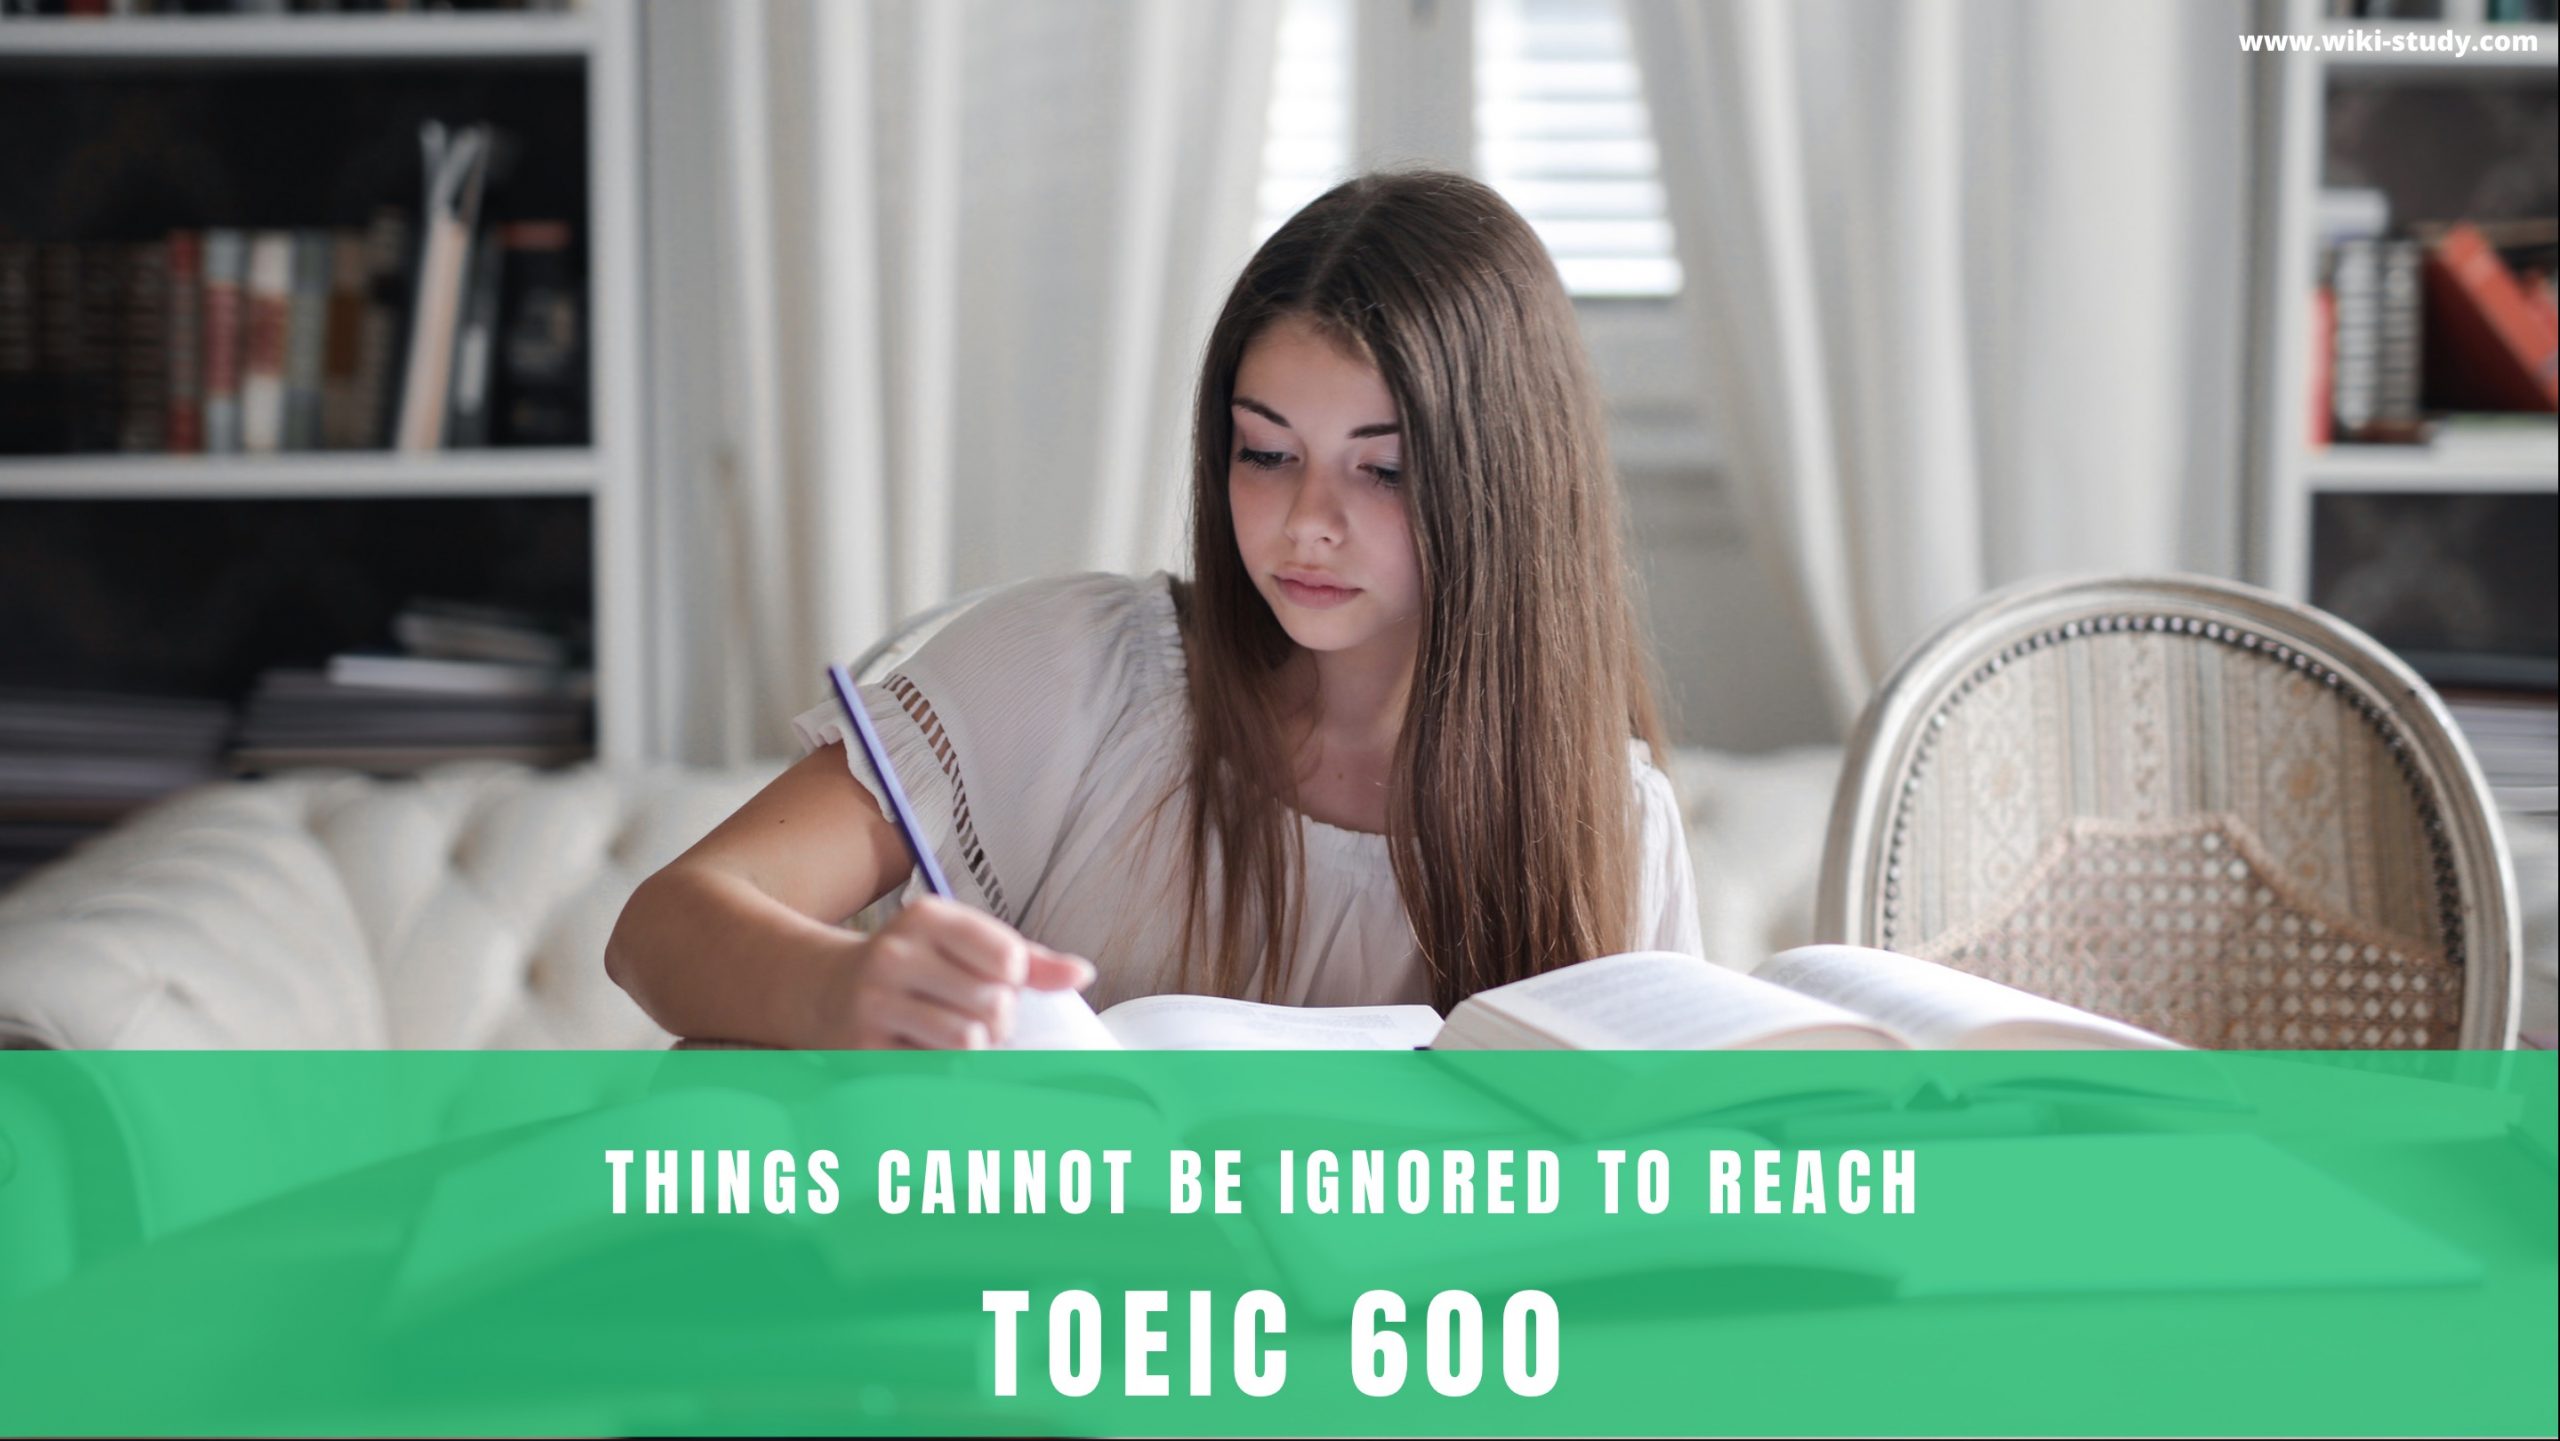 THINGS CANNOT BE IGNORED TO REACH TOEIC 600